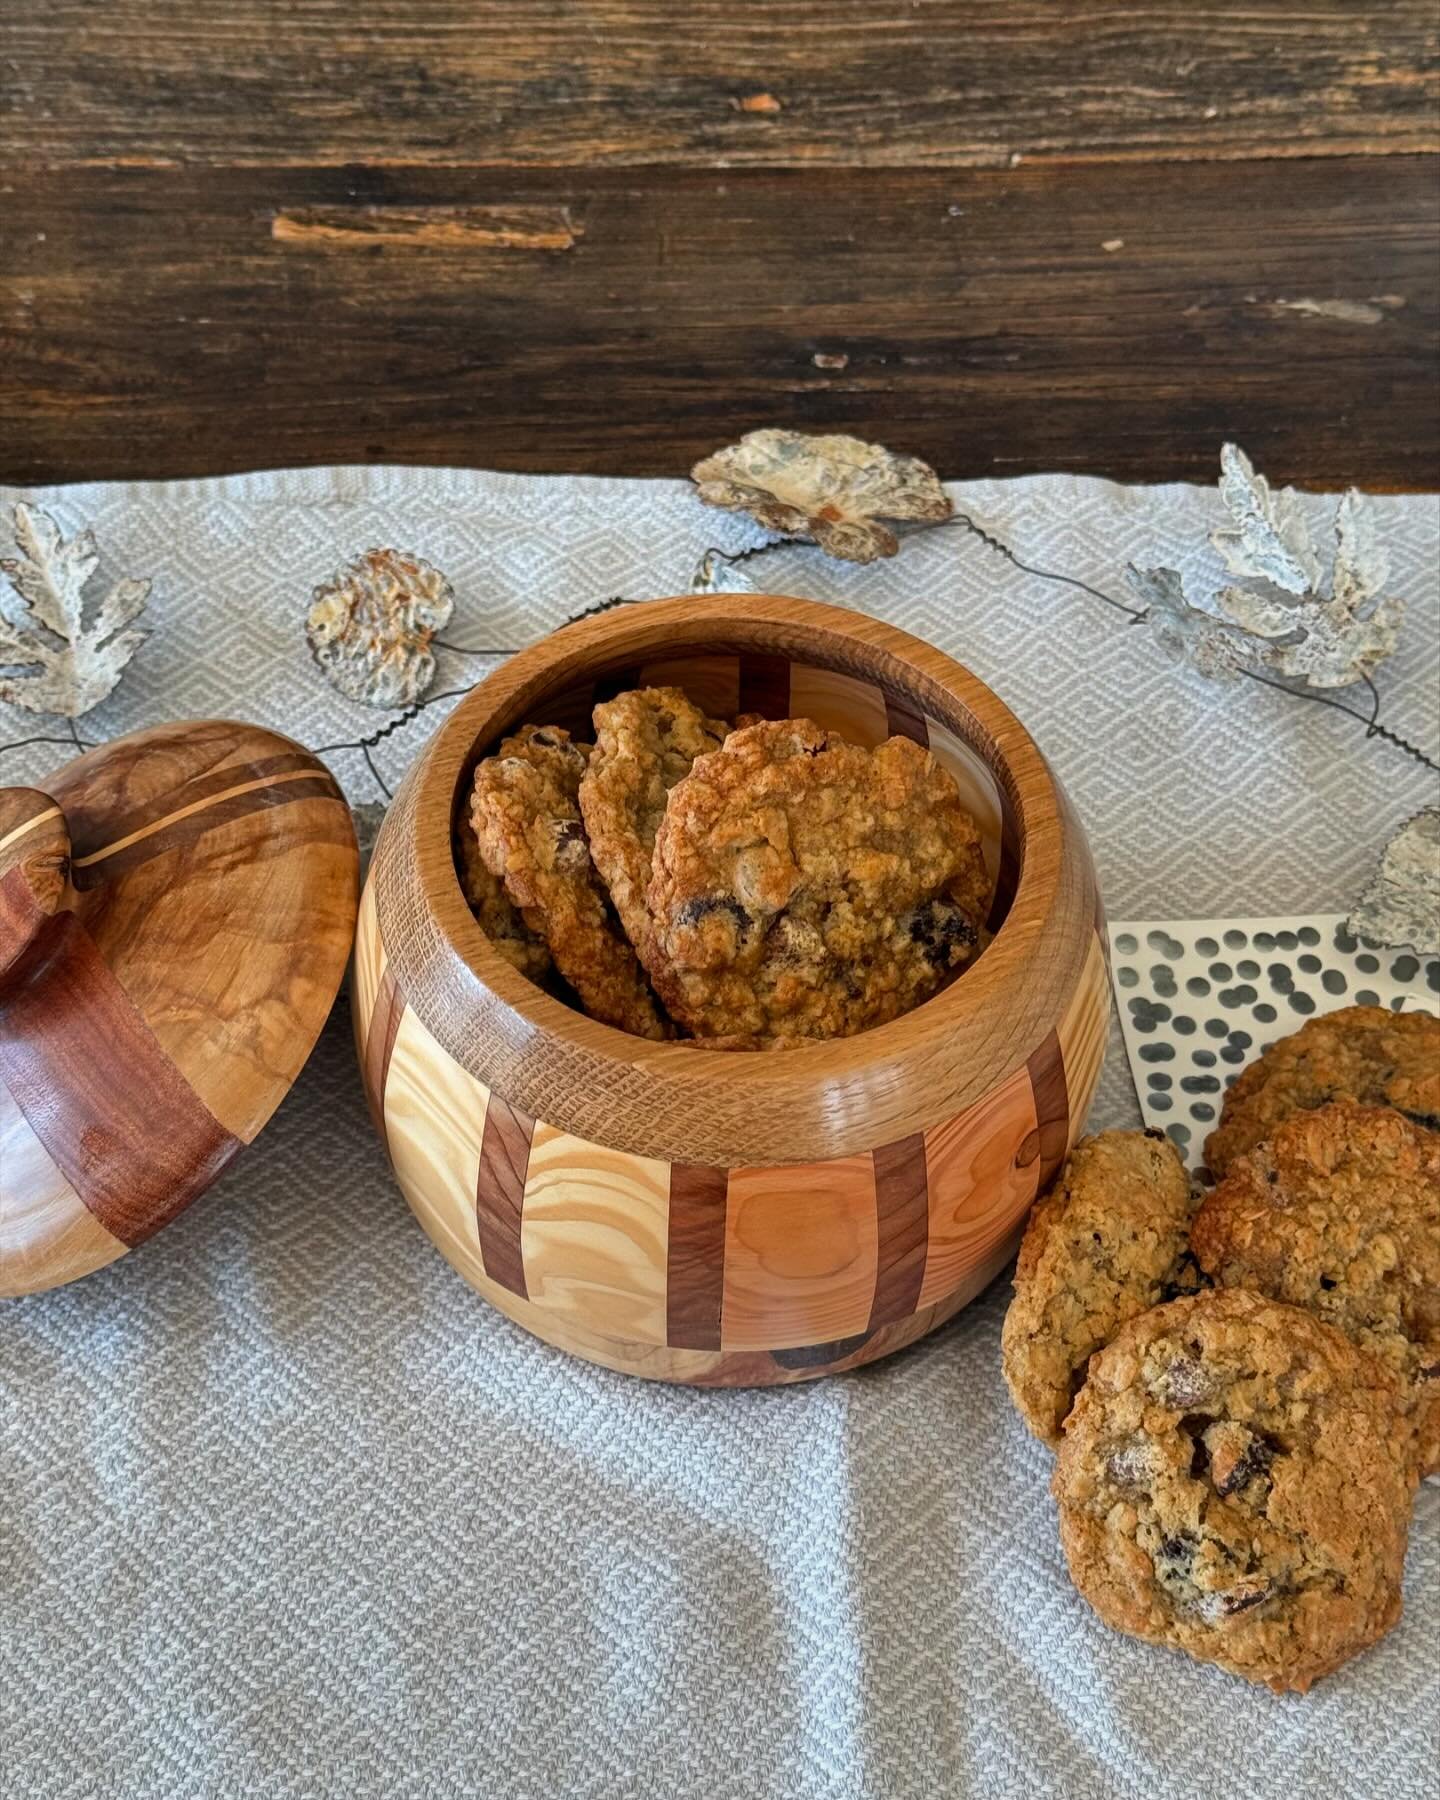 Hibiscus White Chocolate Oatmeal Cookies from Chicano Bakes  for RainydayBites cookbook club. Love these cookies, the perfect chew. The recipe calls for dried sweetened hibiscus with dried cranberries or cherries as a substitute. I have dried hibiscu